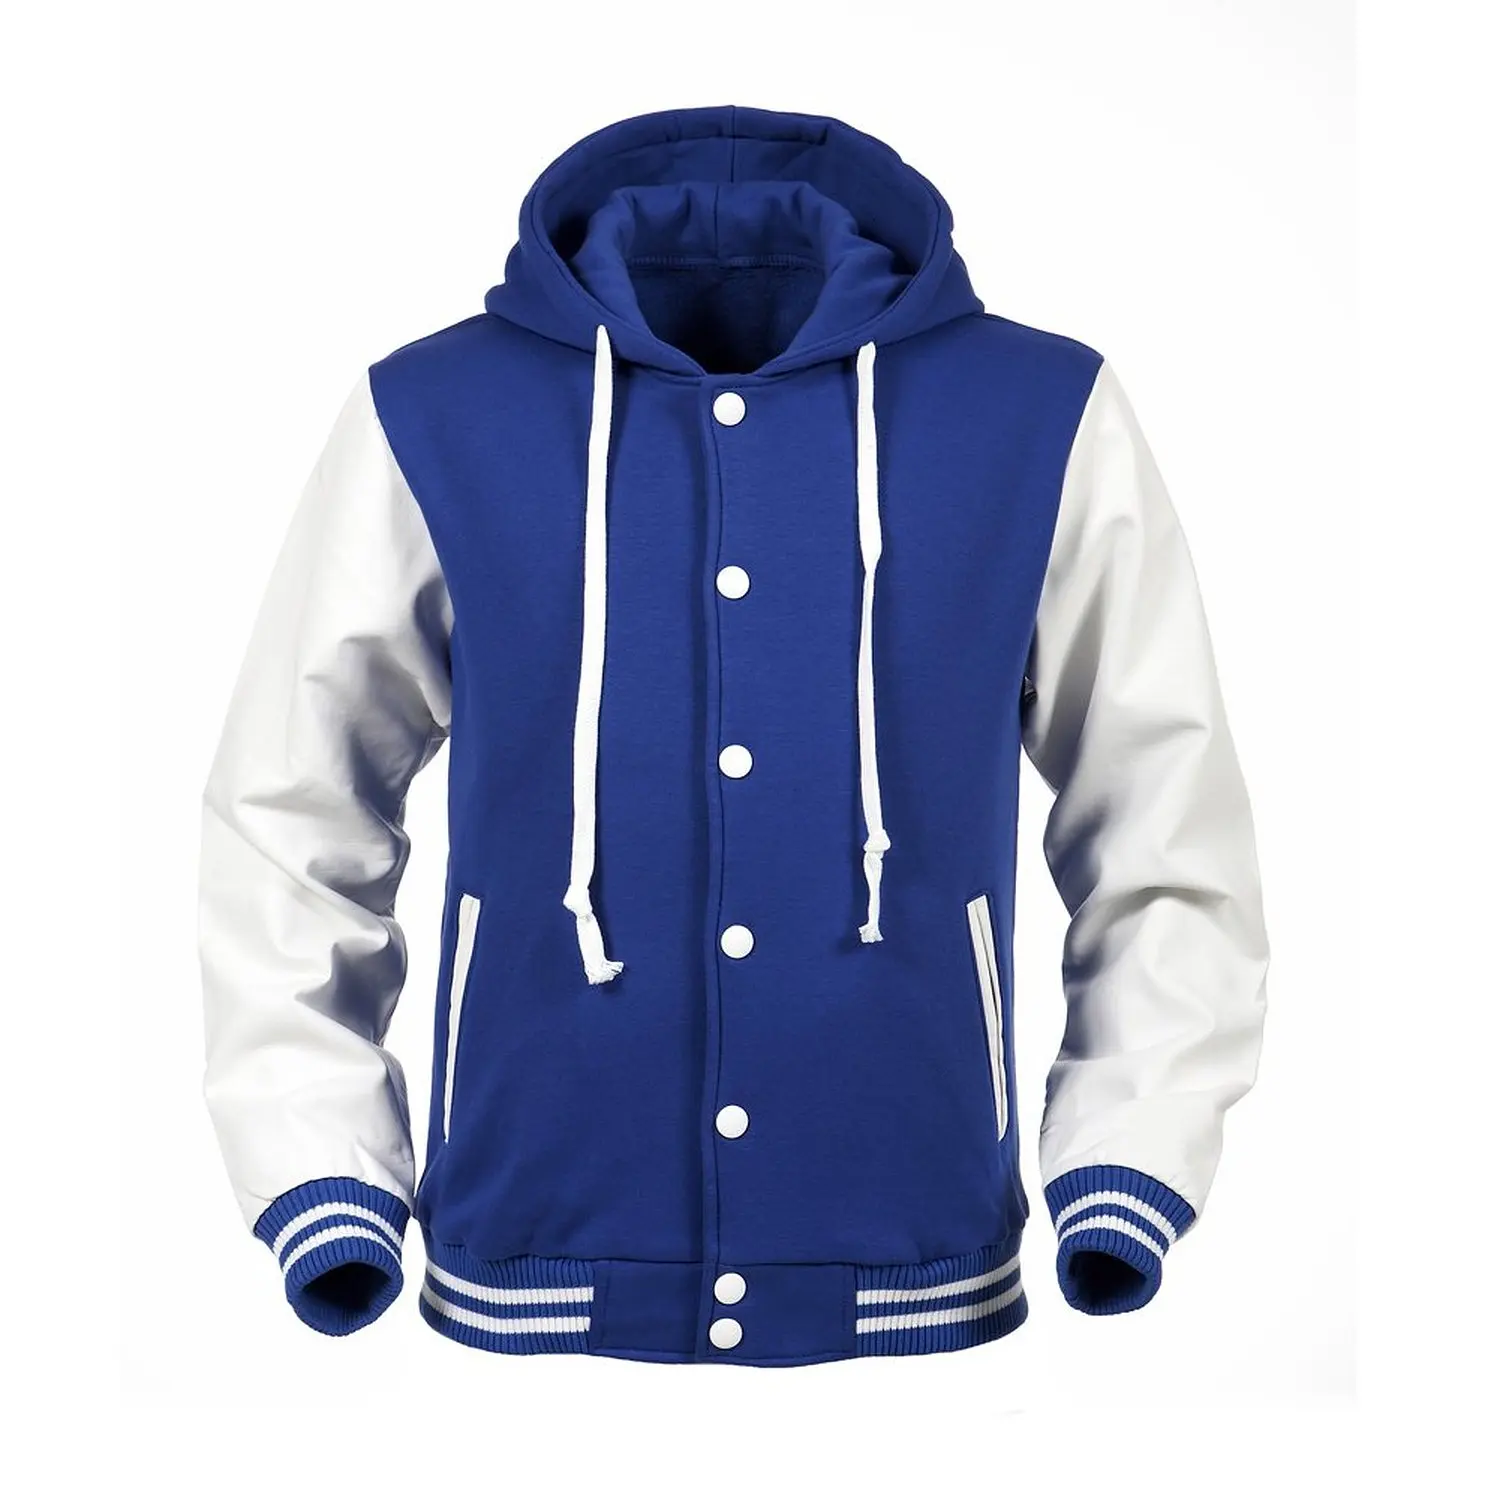 Blue With Yellow Linning Varsity Jackets For Casual Wear And Sports ...